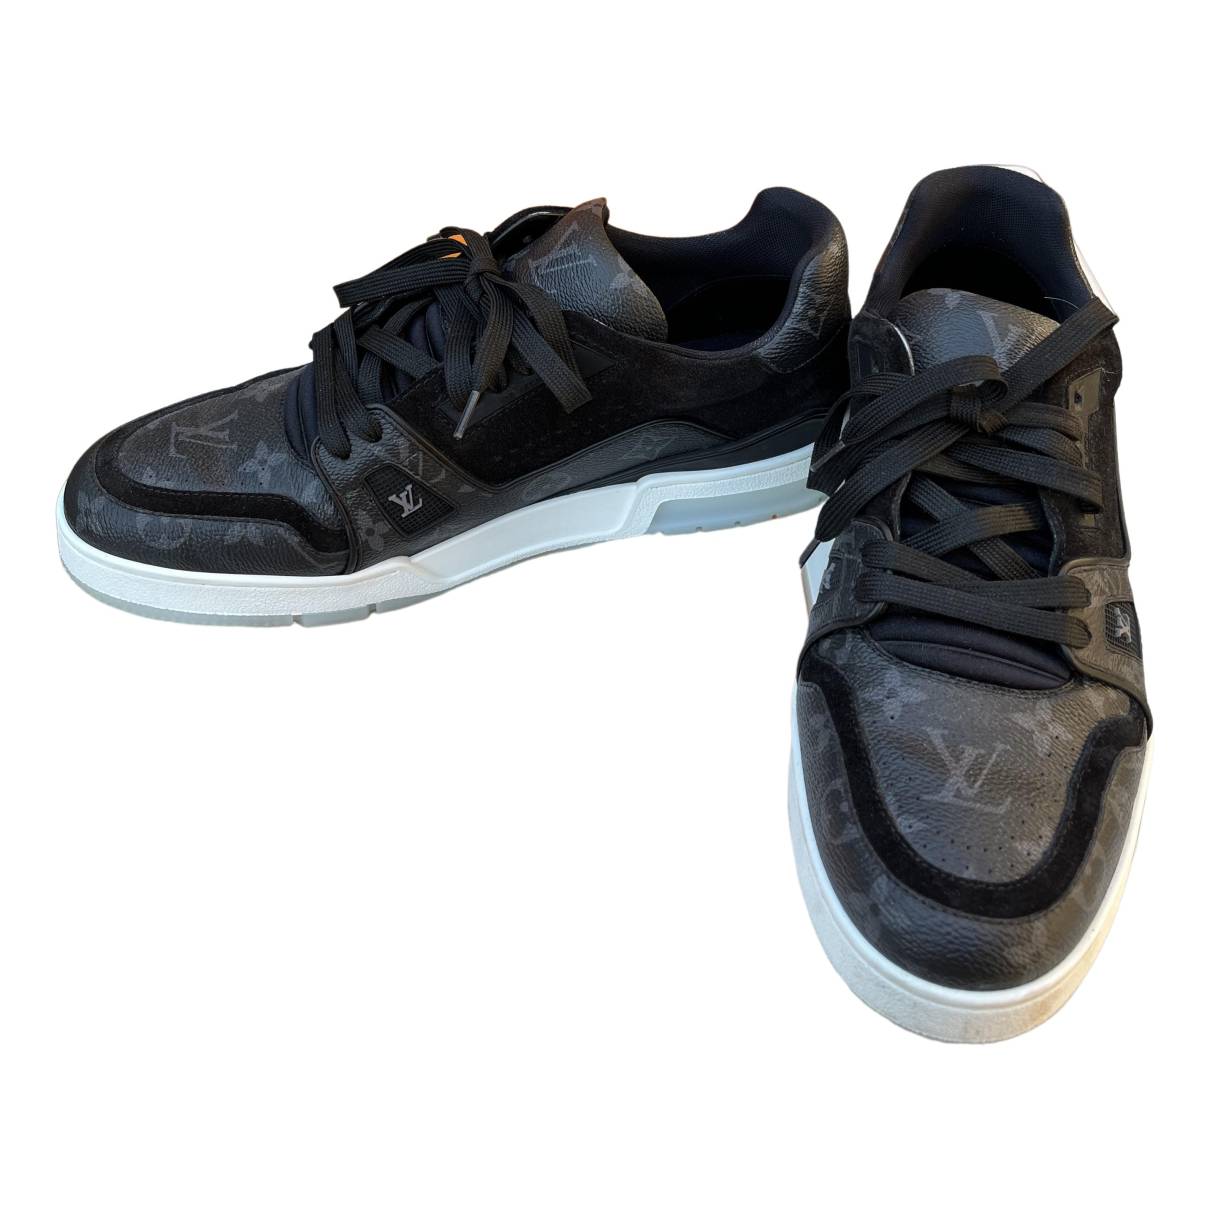 Lv trainer cloth low trainers Louis Vuitton Anthracite size 43.5 EU in  Cloth - 30796418